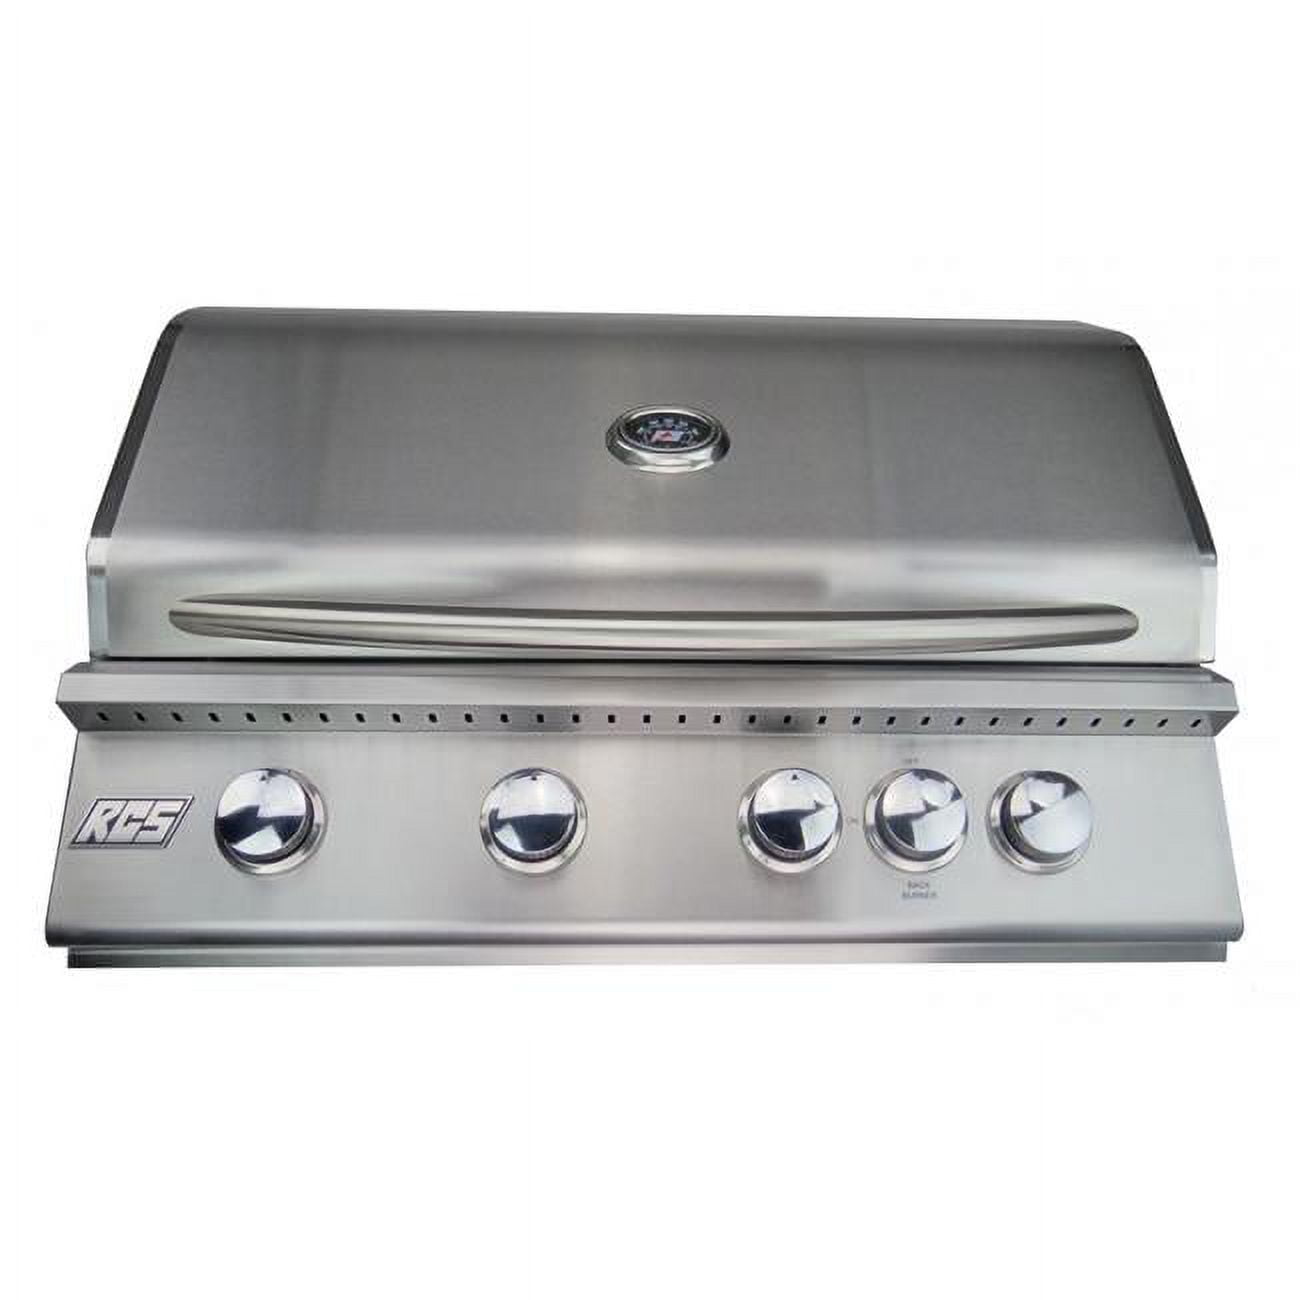 Rjc32alp 32 In. Premier Grill With Rear Burner-propane, Stainless Steel